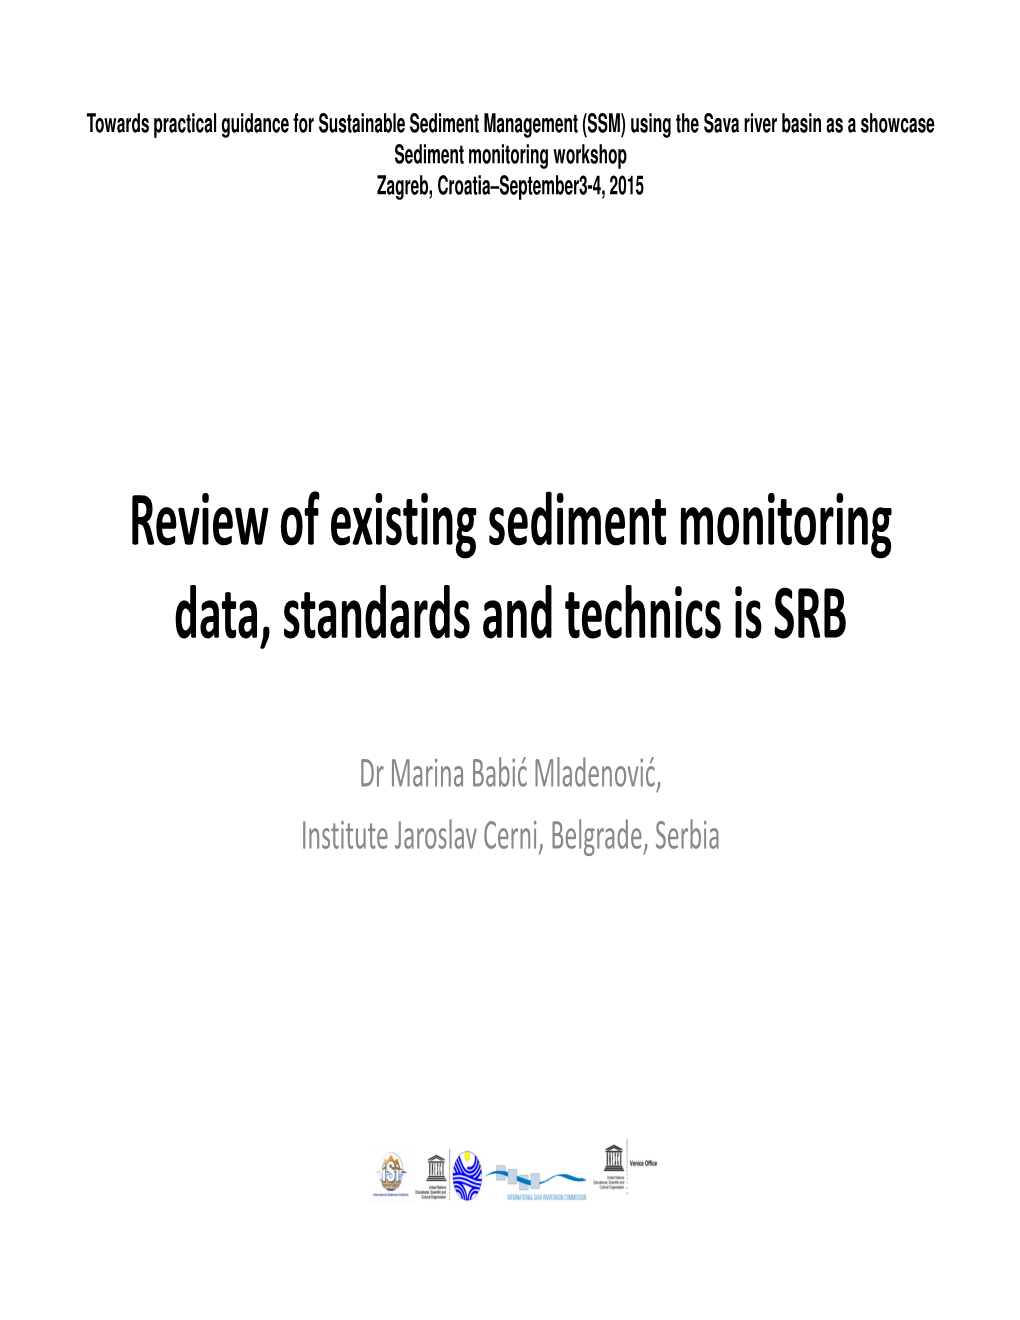 Review of Existing Sediment Monitoring Data, Standards and Technics Is SRB